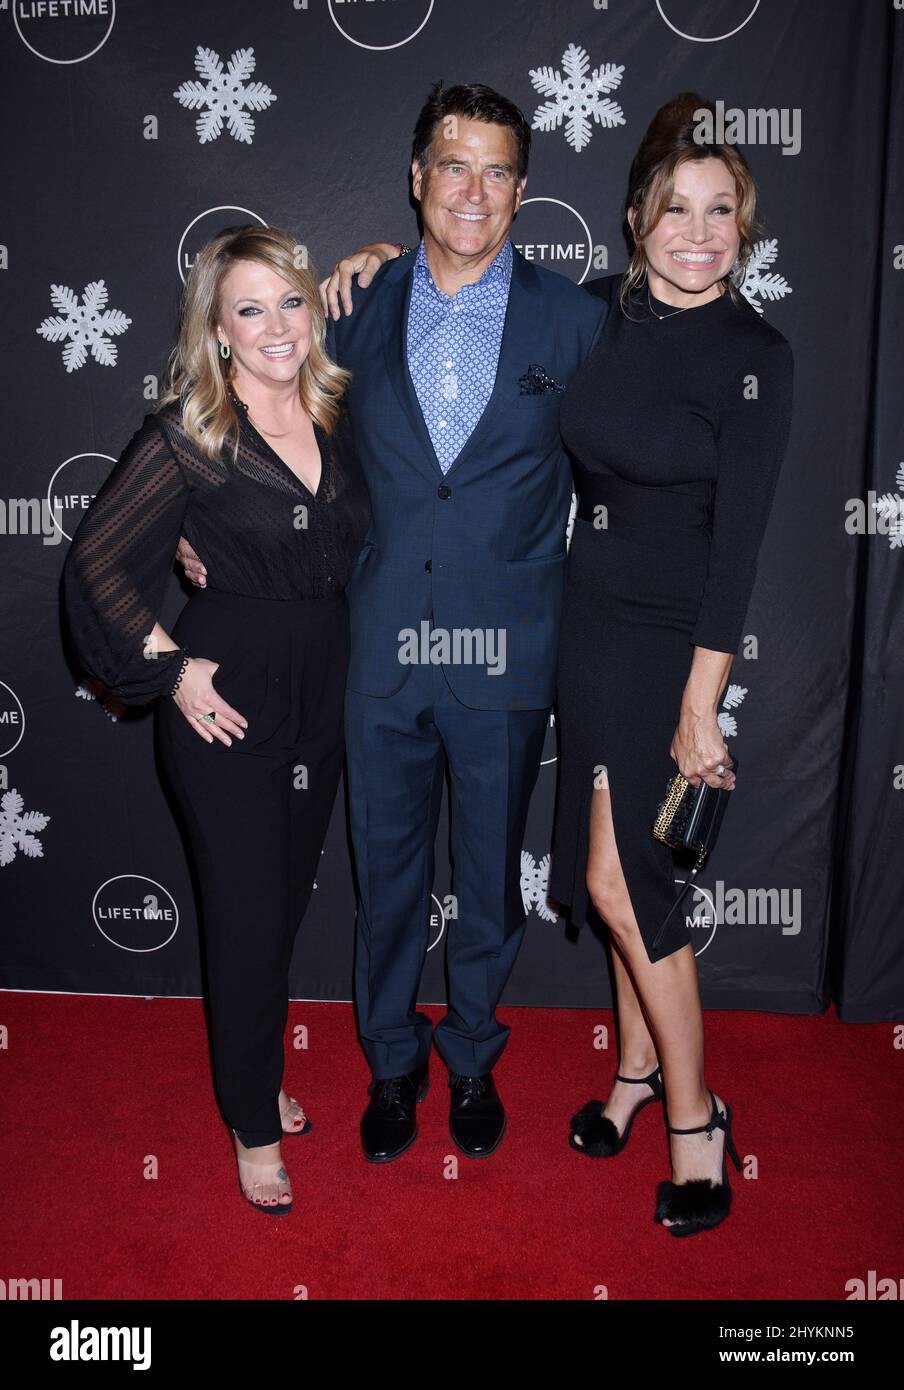 Melissa Joan Hart, Ted McGinley and Gigi Rice at the It's A Wonderful Lifetime Red Carpet held at the STK Los Angeles Stock Photo